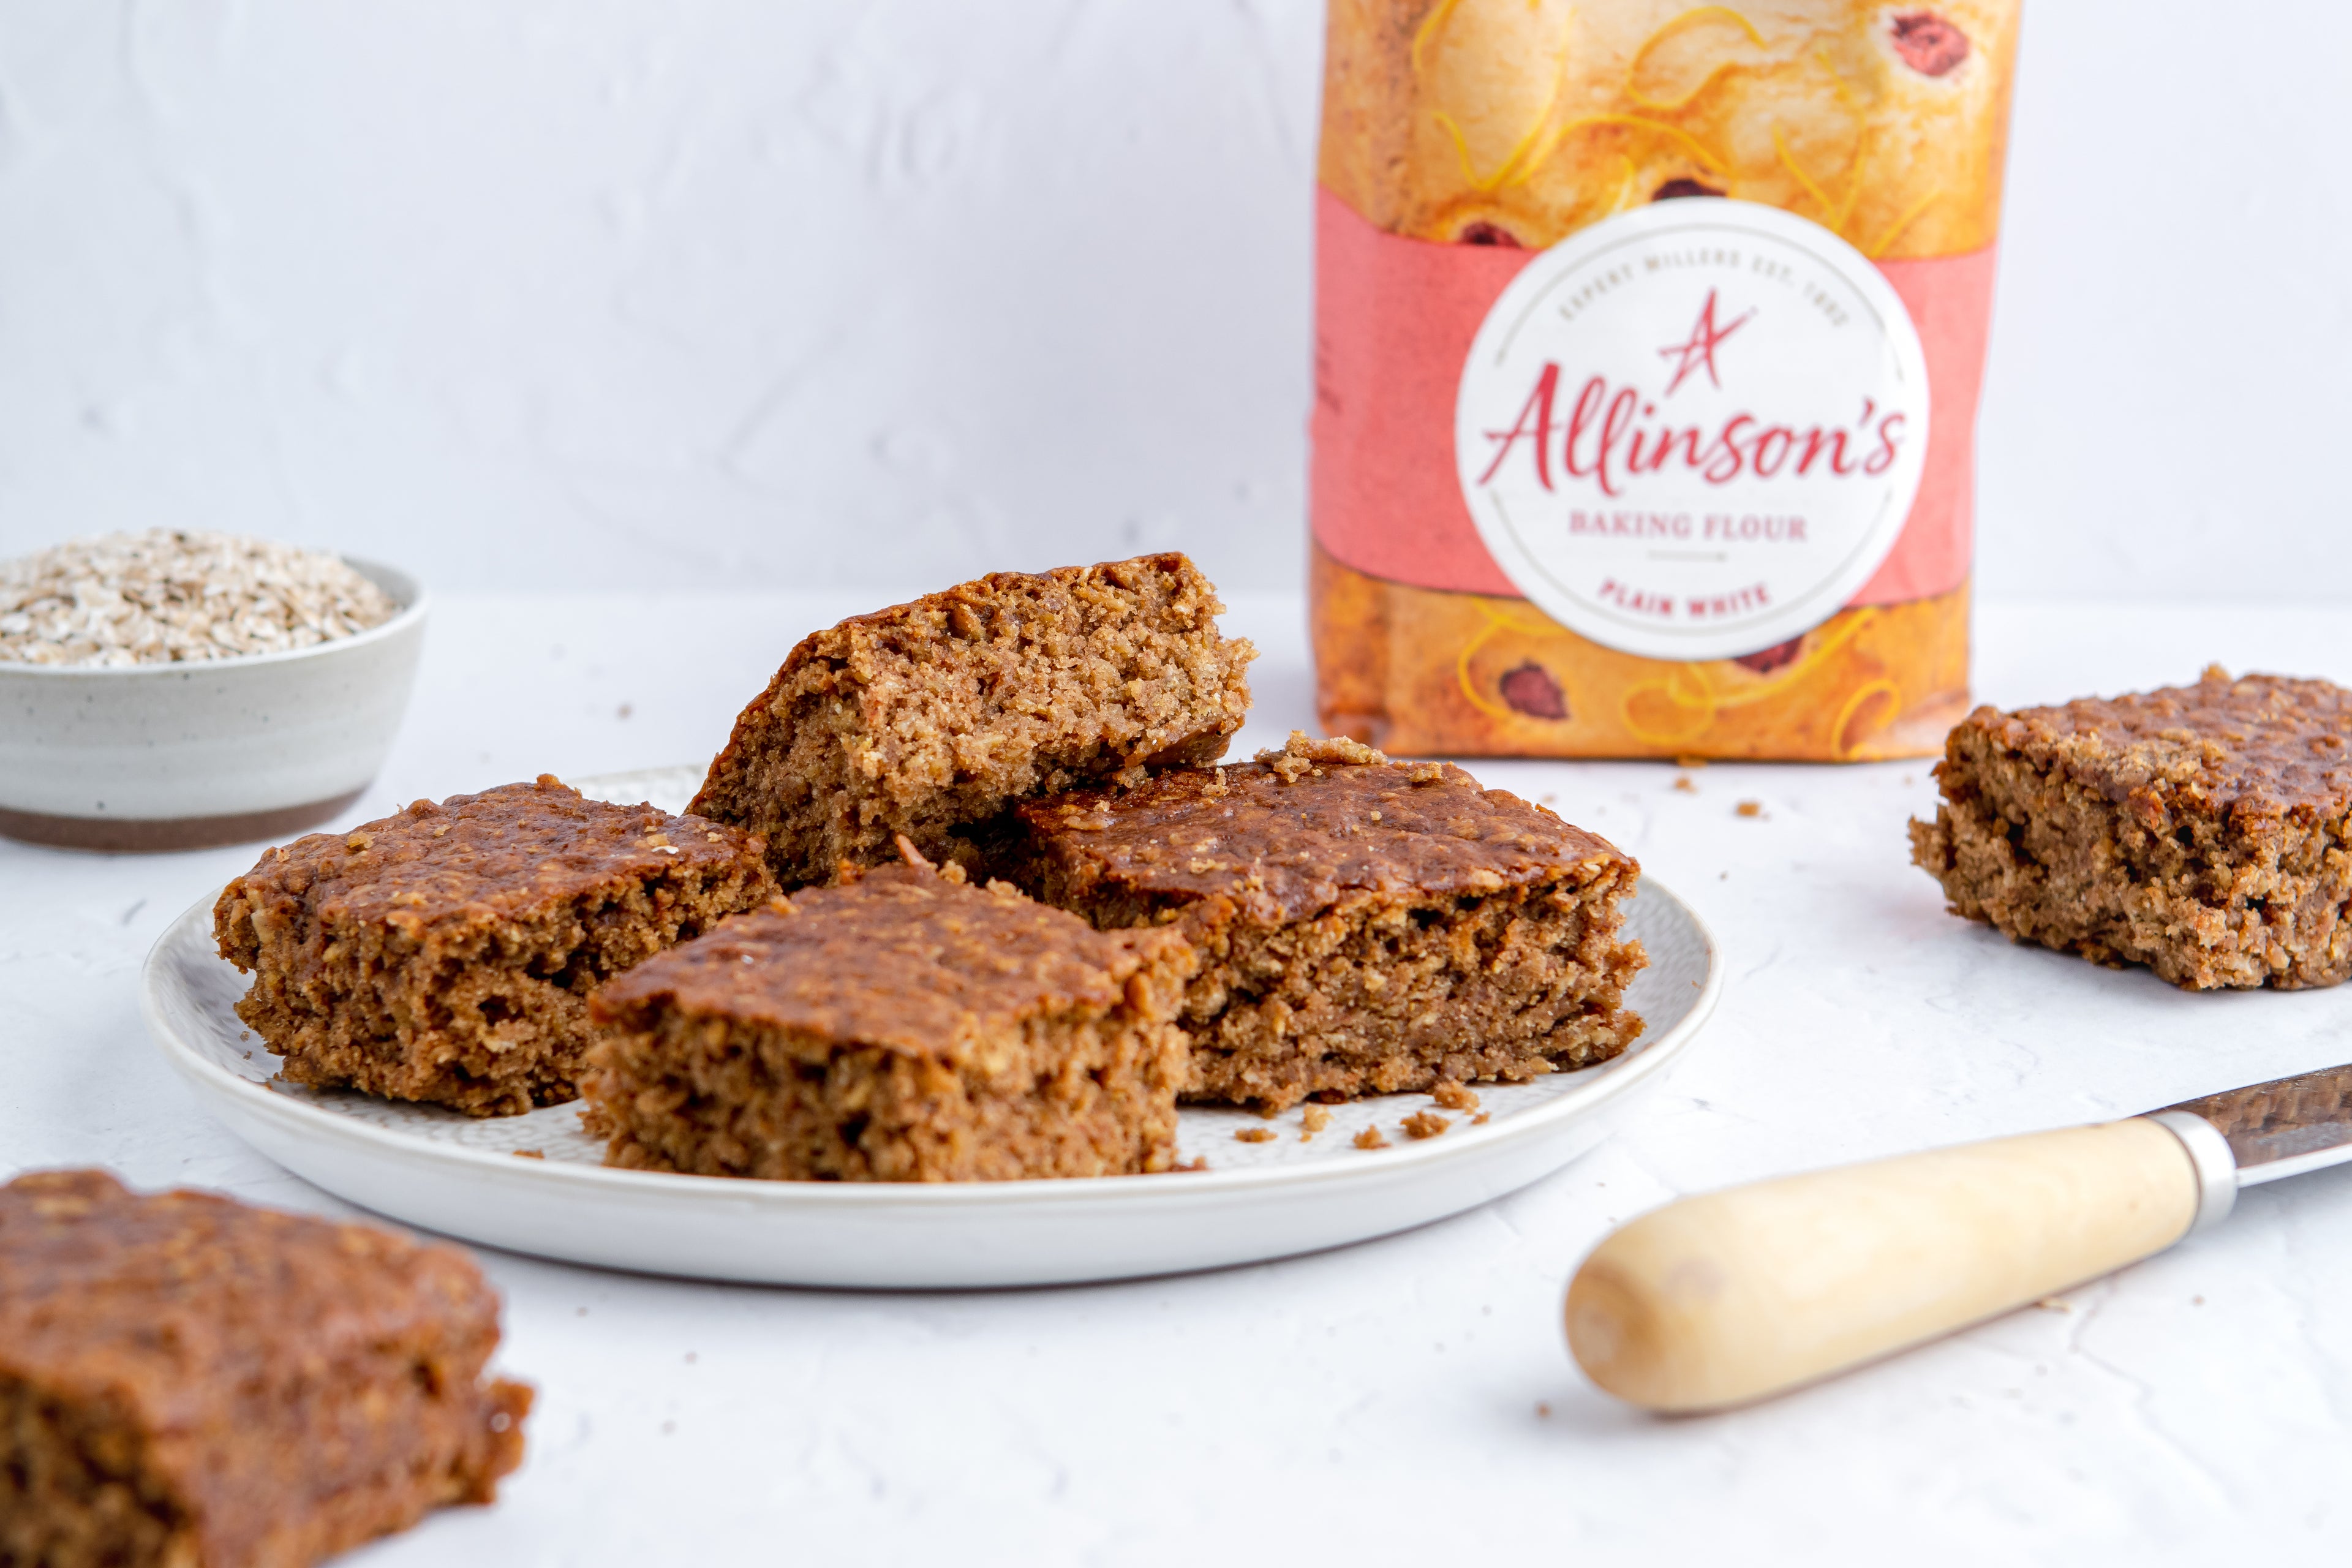 Sticky Yorkshire Parkin slices on a plate with Allinson's Plain White flour in the backgroun